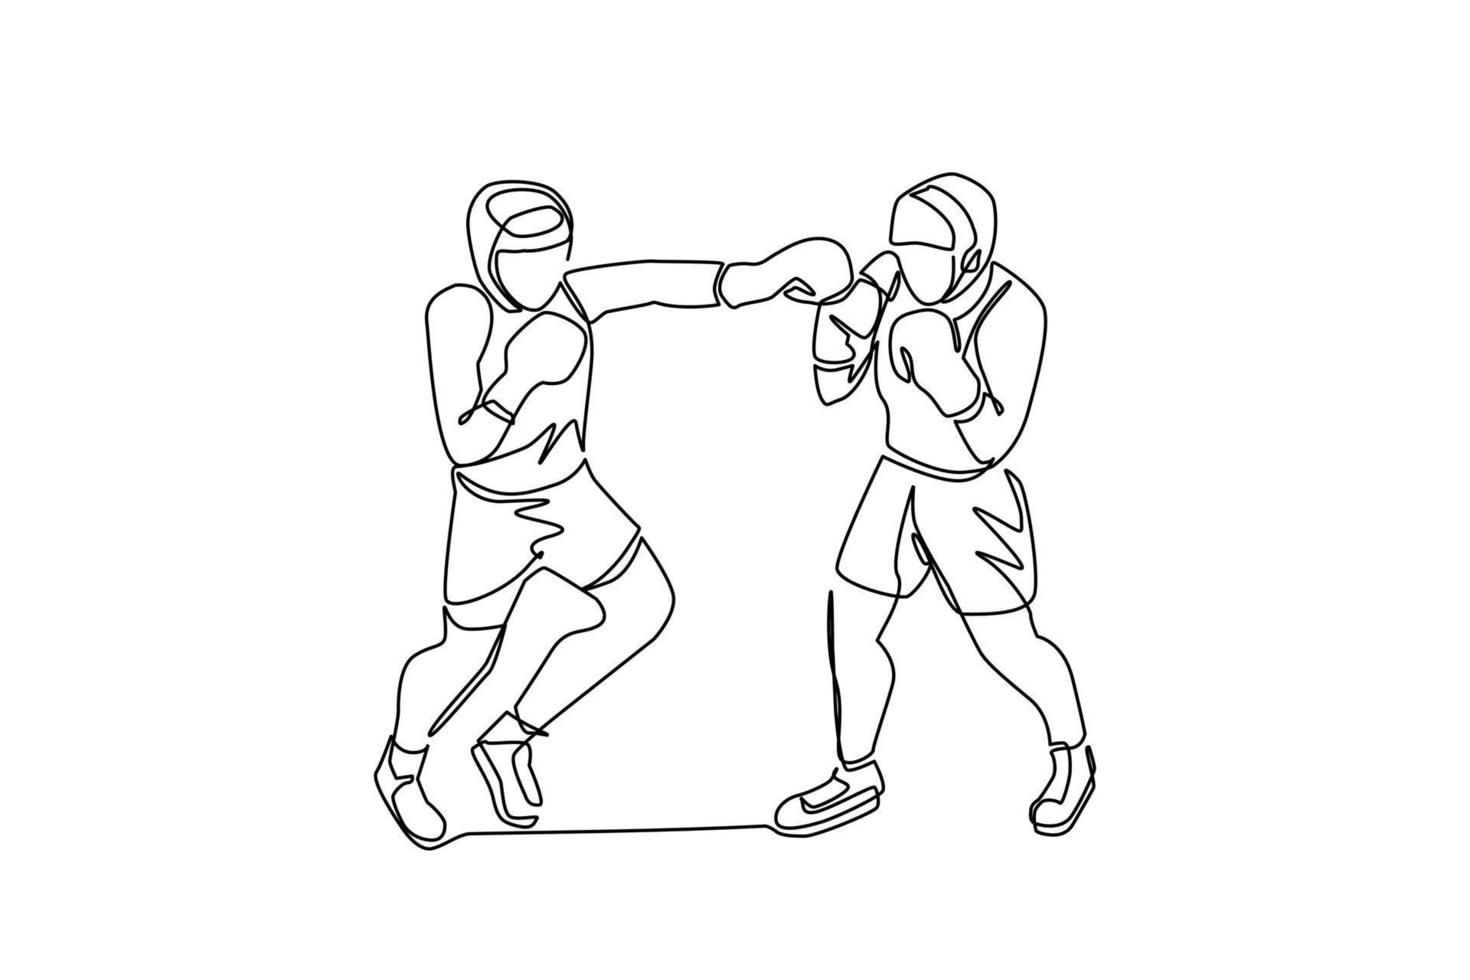 Continuous one line drawing boxers fighting on ring, opponents in shorts and gloves fight on arena with spotlights and ropes. Competition. Dangerous sport. Single line draw design vector illustration